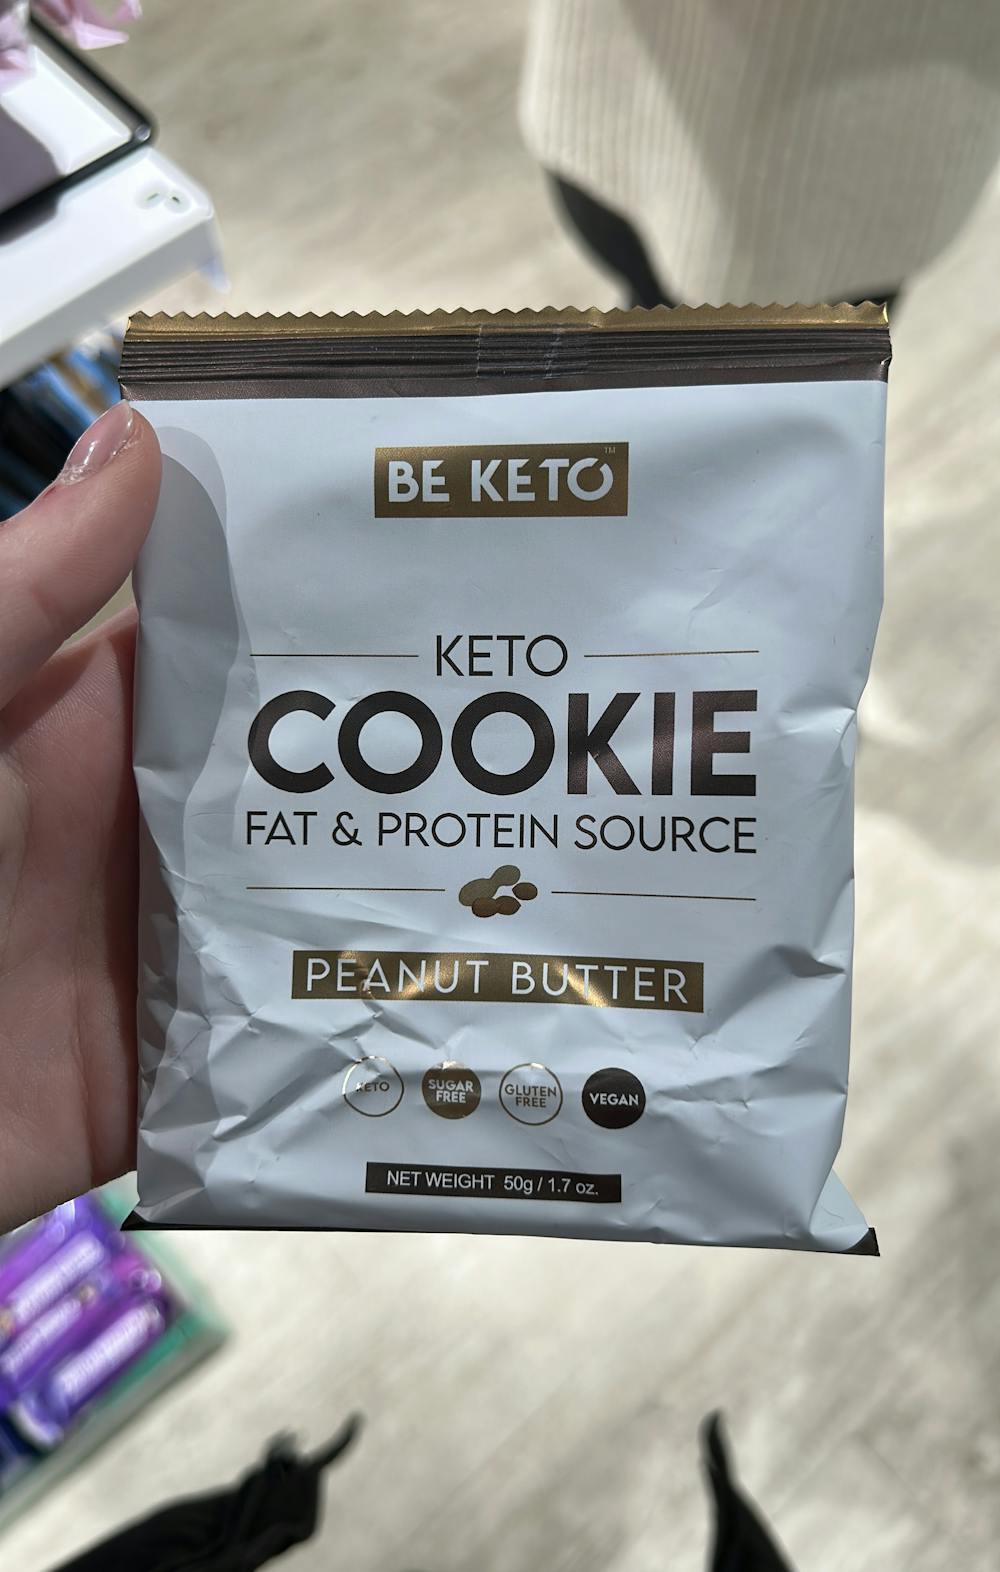 Keto Cookie Fat & Protein source, Peanut Butter, Be Keto